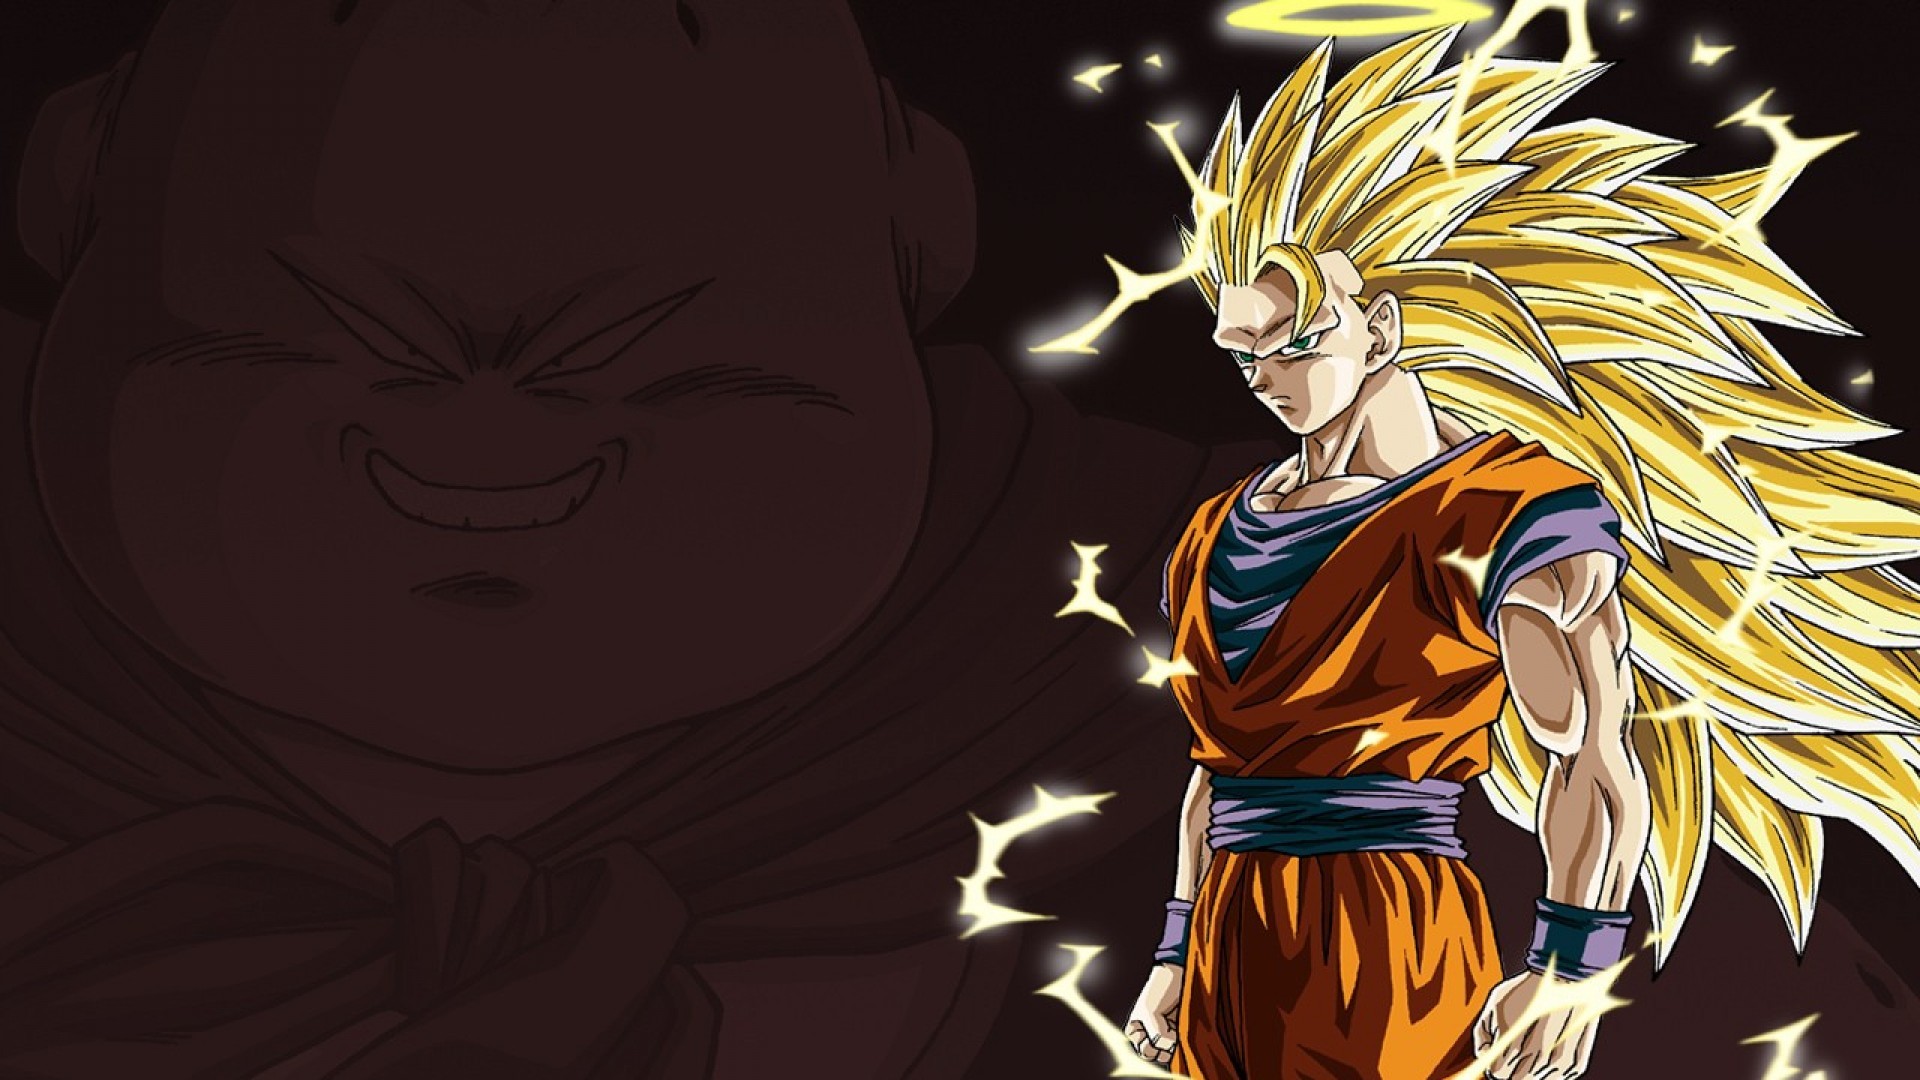 1920x1080 Dragonball Z Wallpaper Collection Dbz Wallpapers Wallpapers)